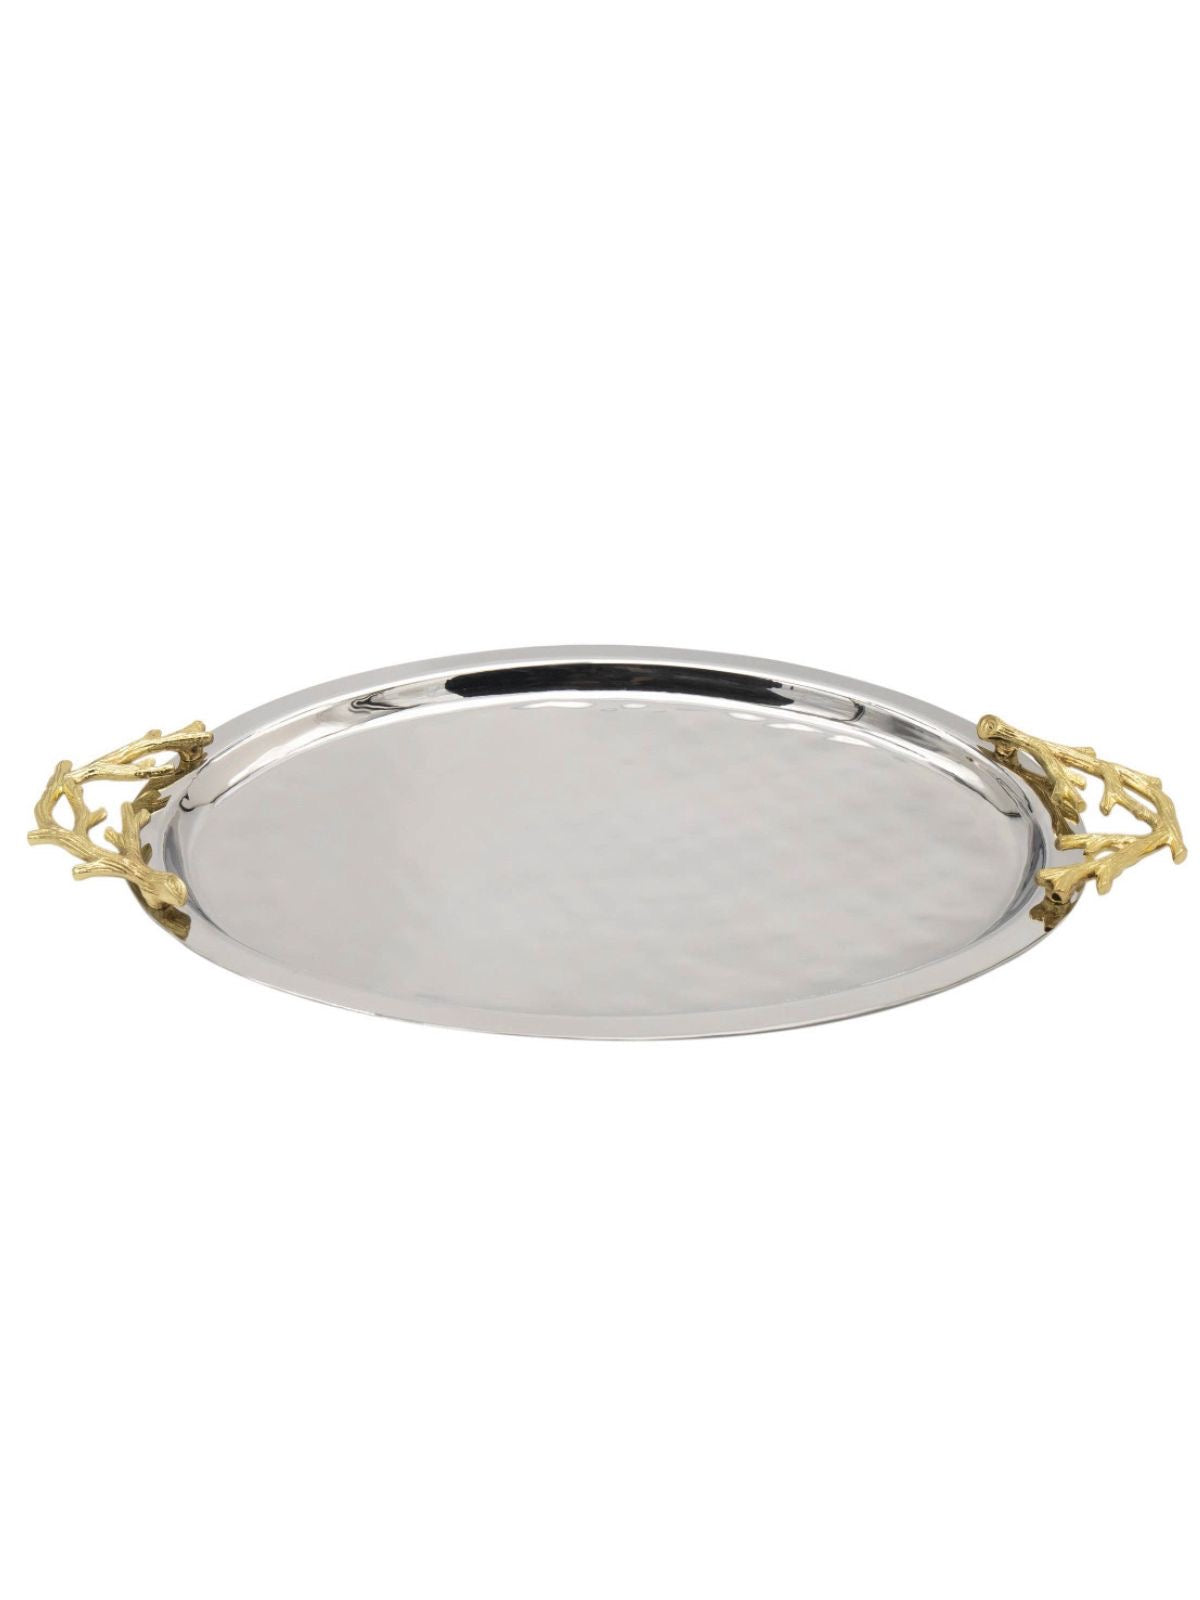 This stainless steel oval tray features gold branch handles and is a perfect for serving your favorite dishes.  